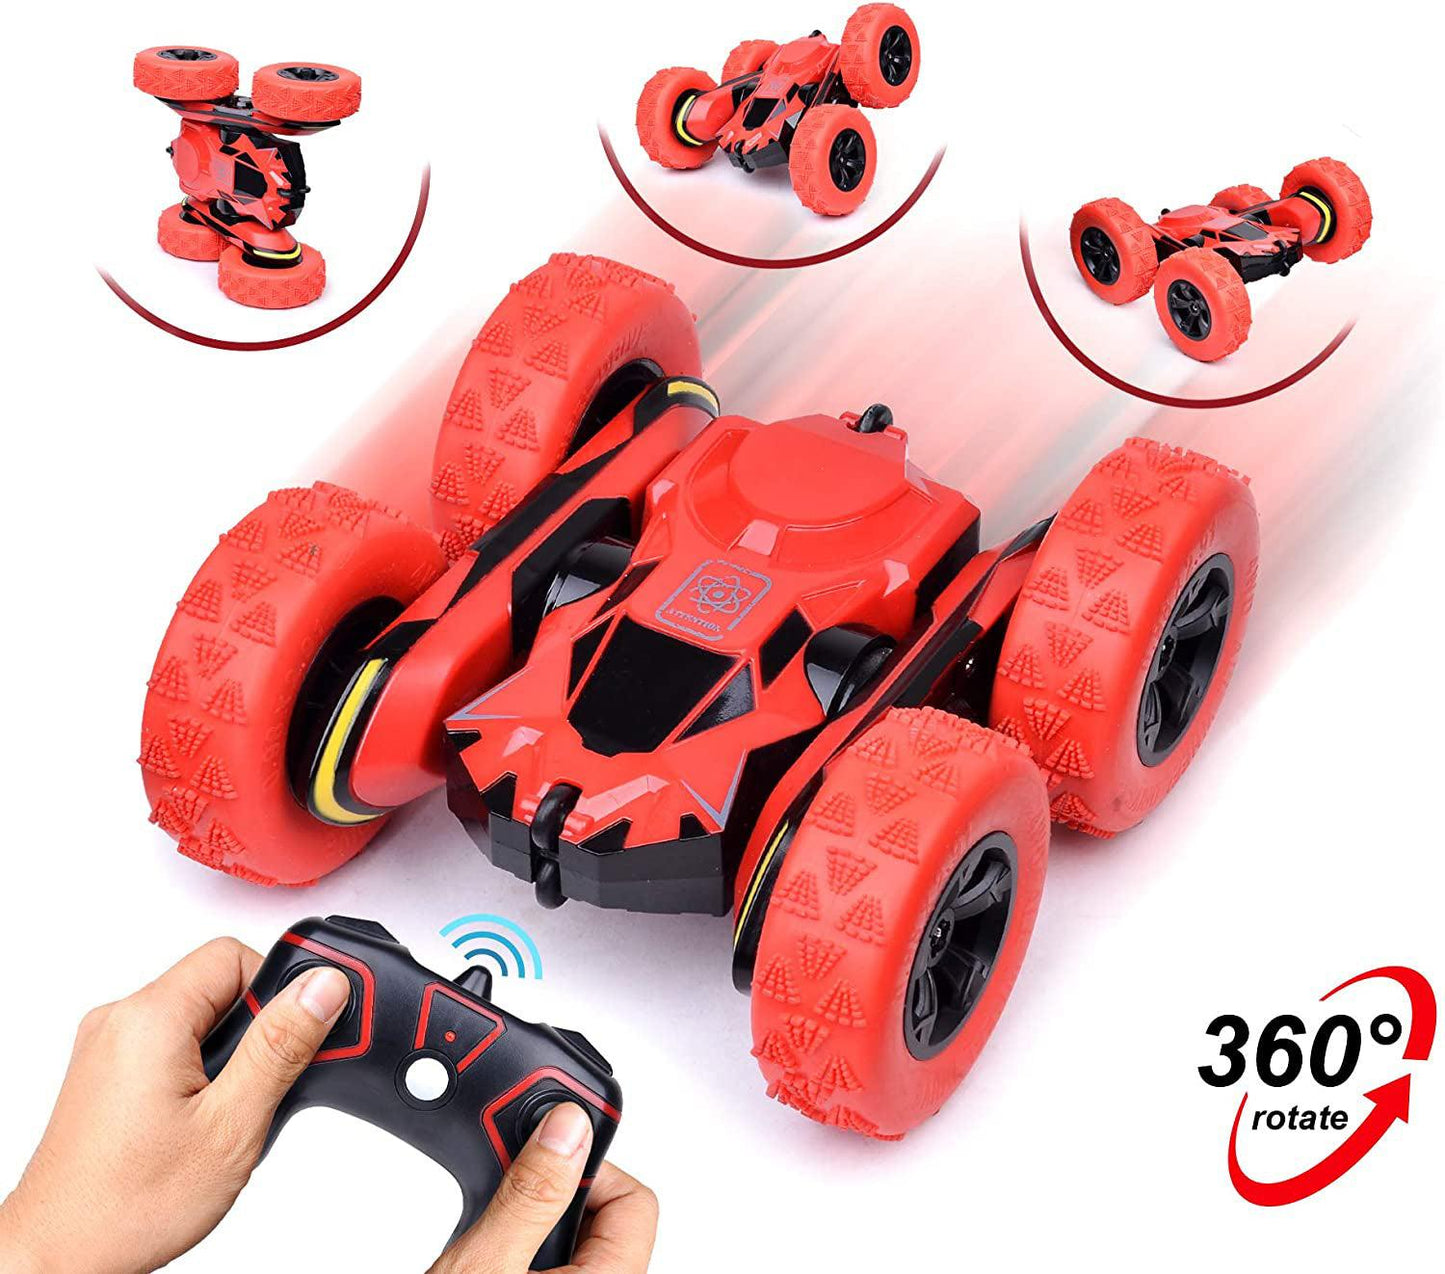 RoboCAR - Remote Control Stunt Car, Radio Control 2.4GHz - Tumbling Spinning Action RC Car for Kids - TheGivenGet